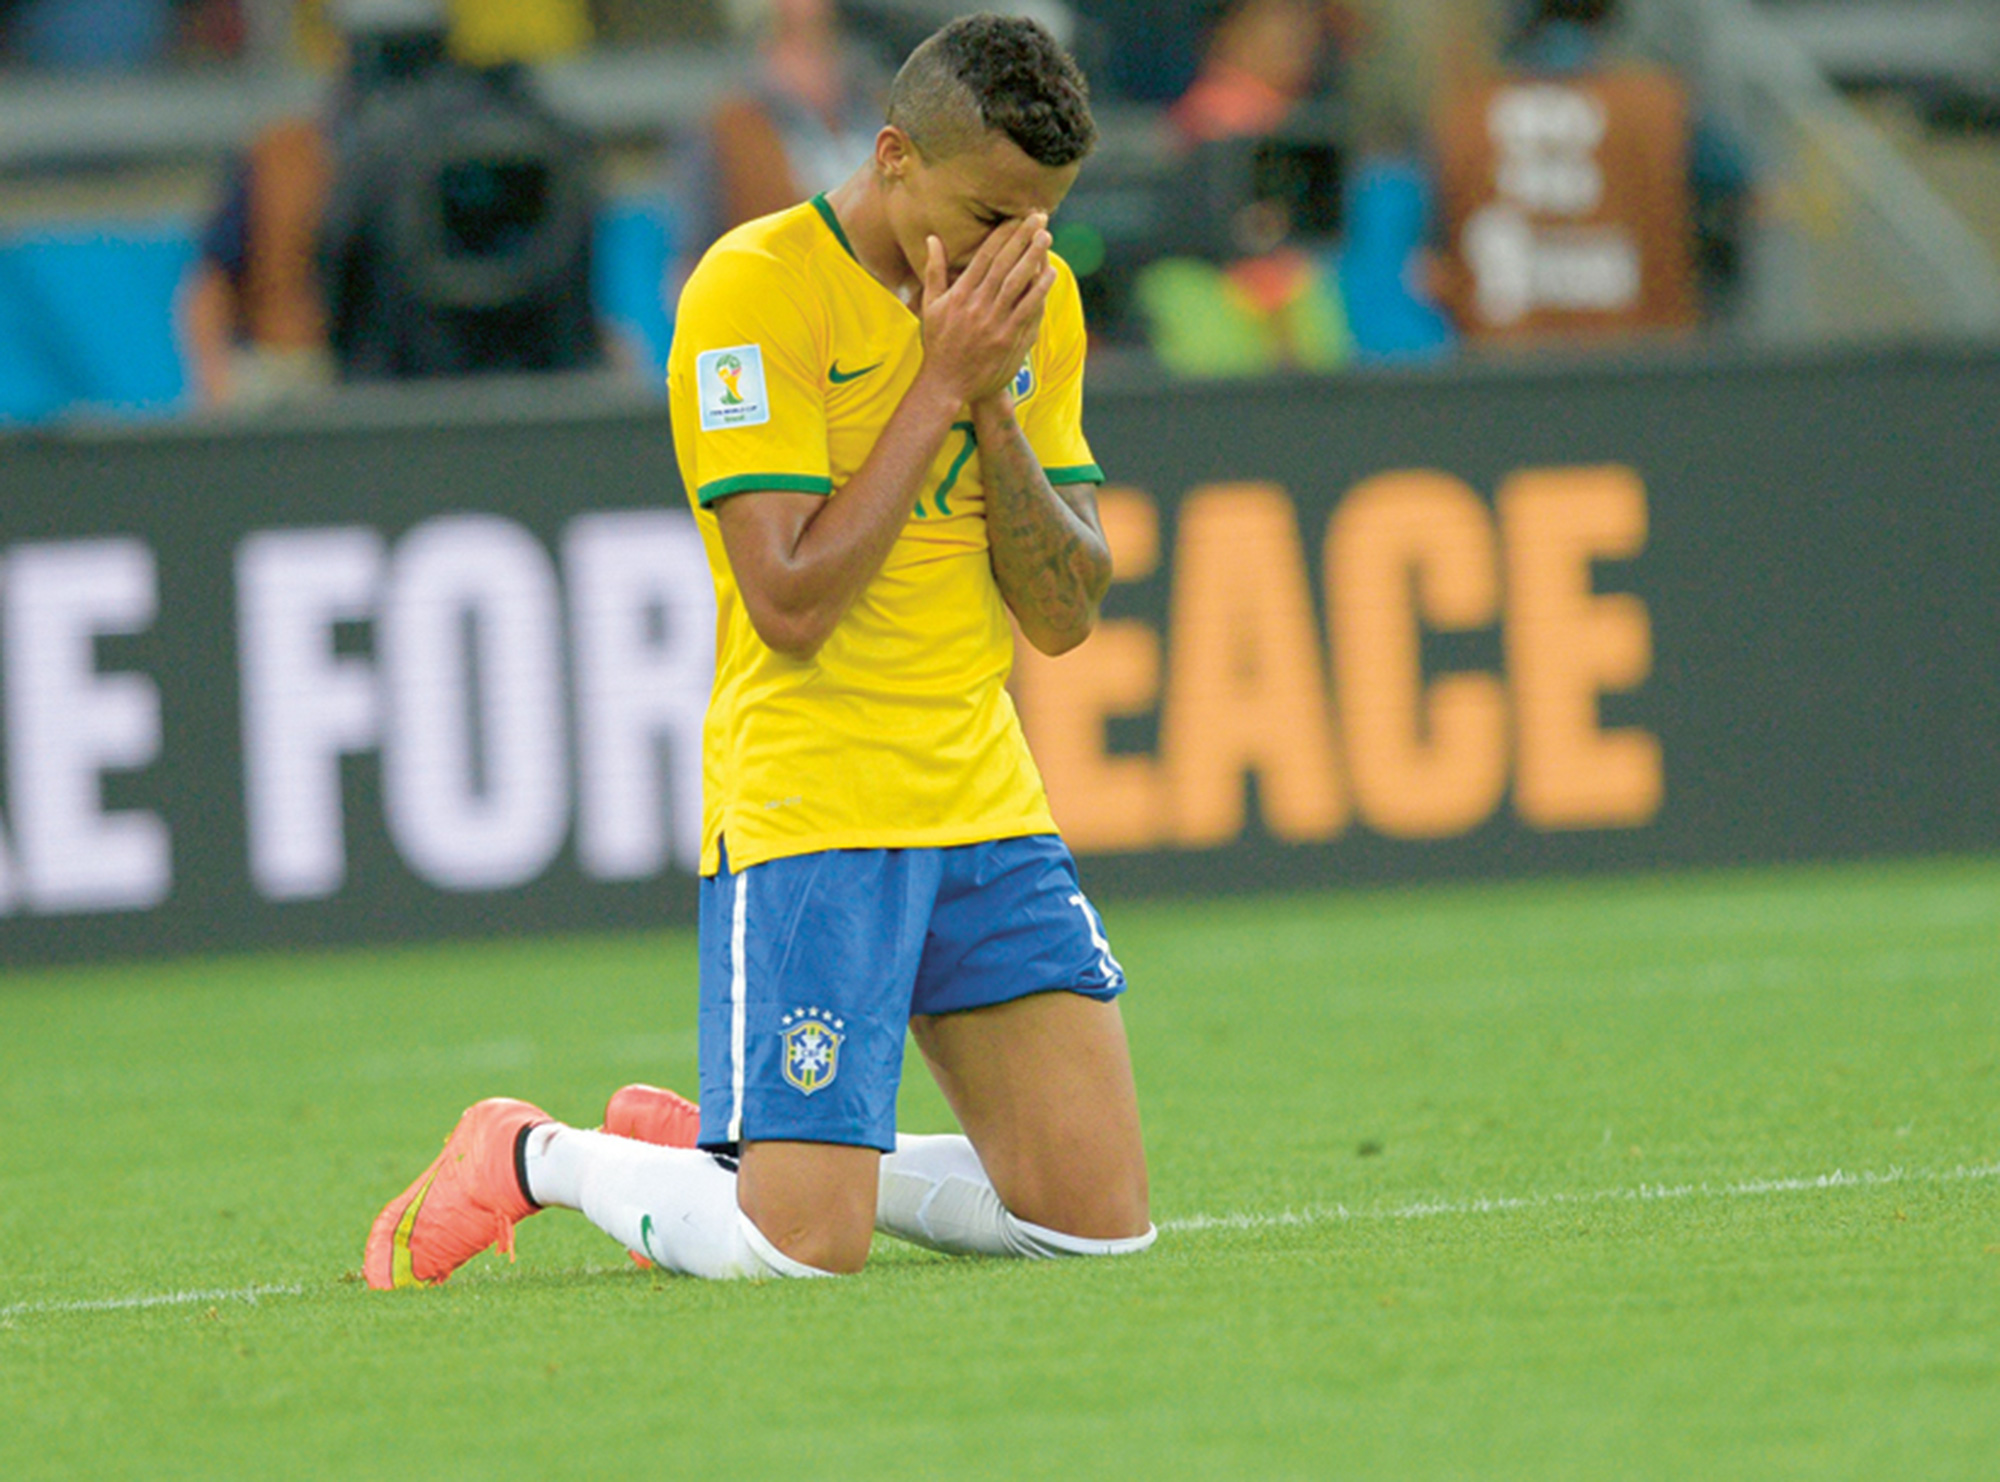 A photograph of a soccer player kneeling on the pitch with his hands in prayer.